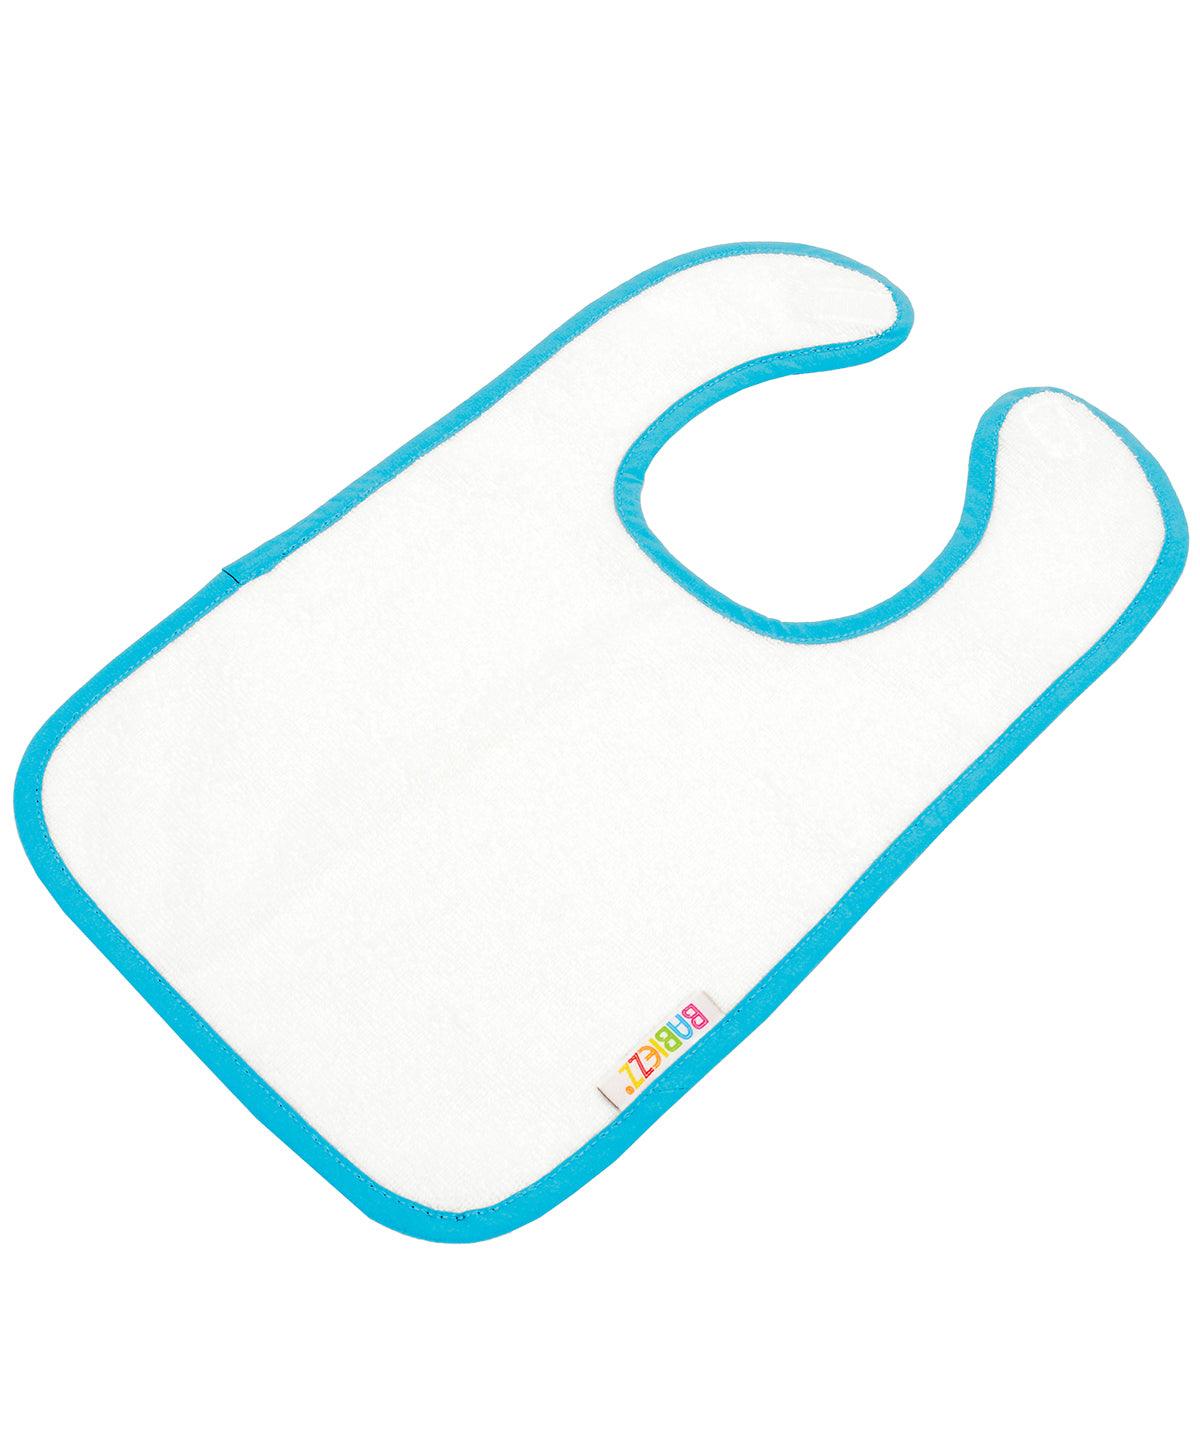 White/Aqua Blue - ARTG® Babiezz® all-over sublimation baby bib Bibs A&R Towels Baby & Toddler, Homewares & Towelling, Sublimation Schoolwear Centres